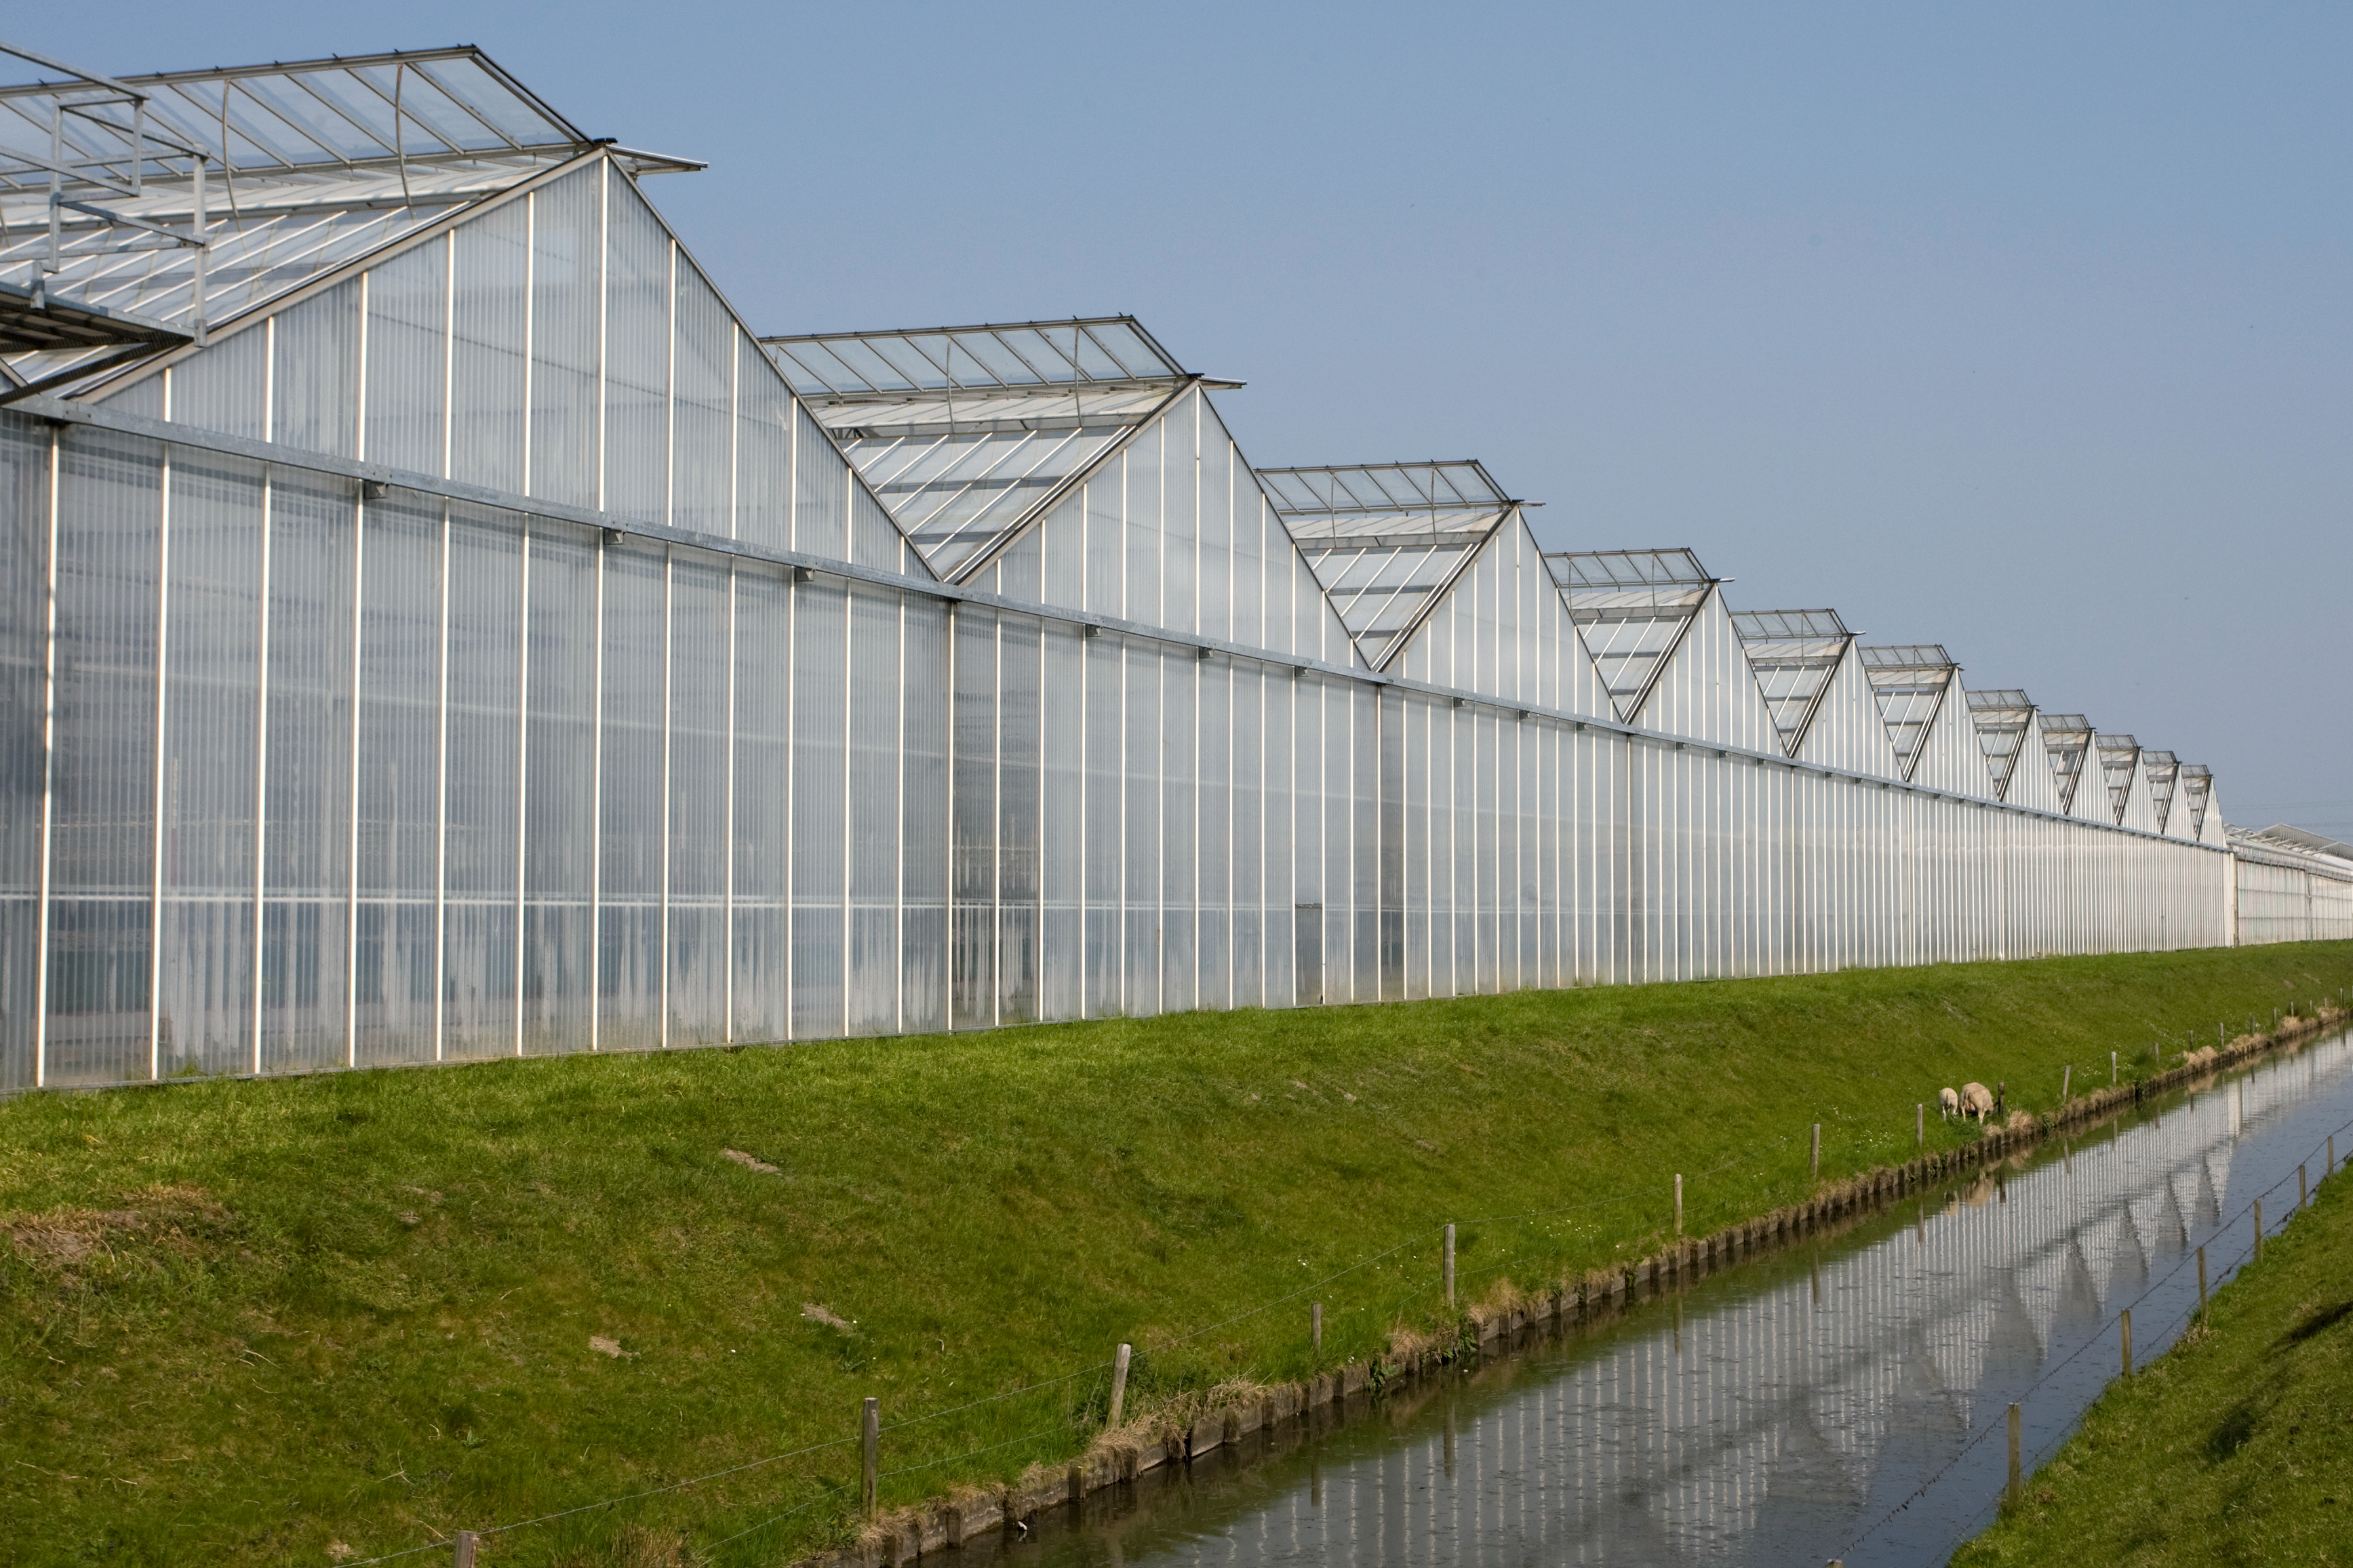 Drive systems for wide-span greenhouses